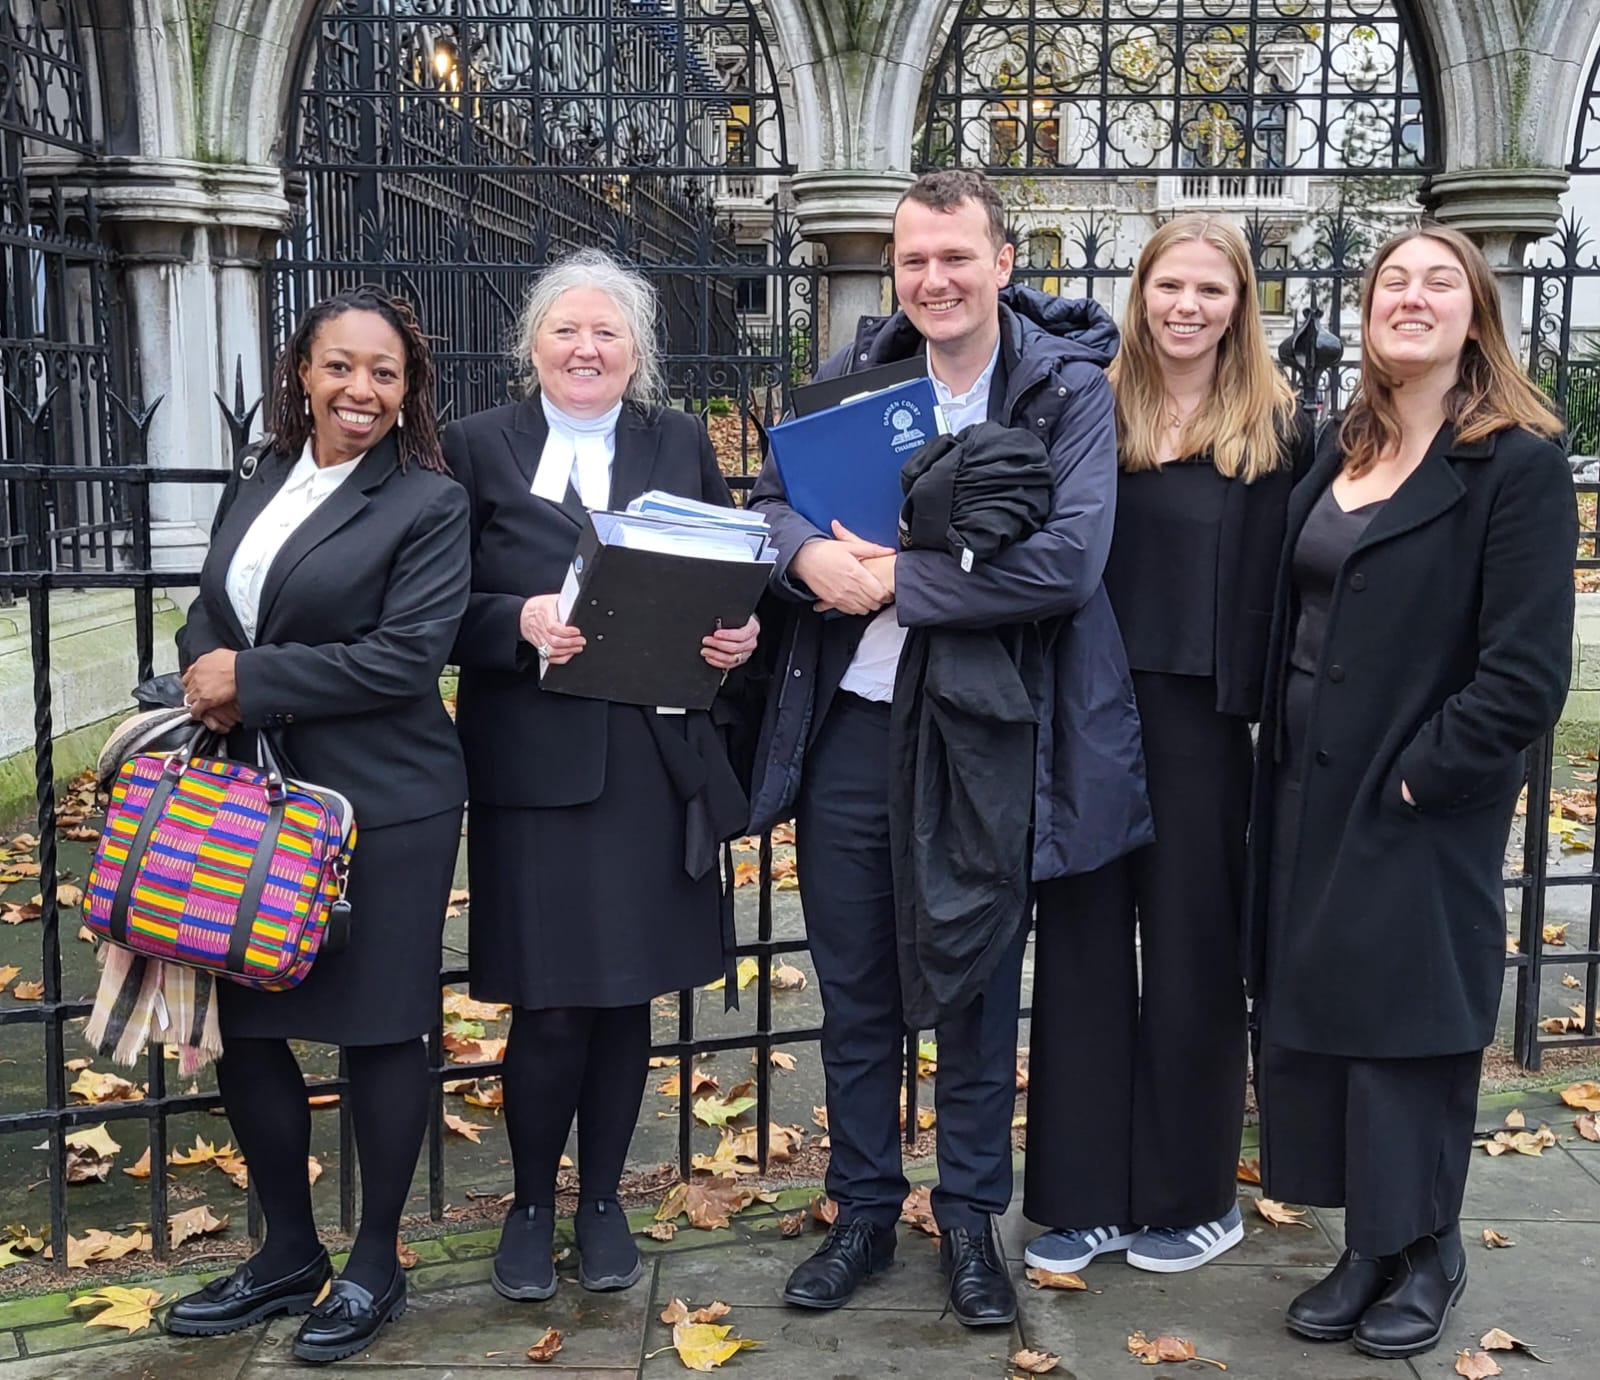 From Left to Right: Sabrina Simpson (CCLC), Stephanie Harrison KC, Ollie Persey, Abigail Hands (CCLC), Yara Ali-Adib (EHRC) outside of the Royal Courts of Justice 
